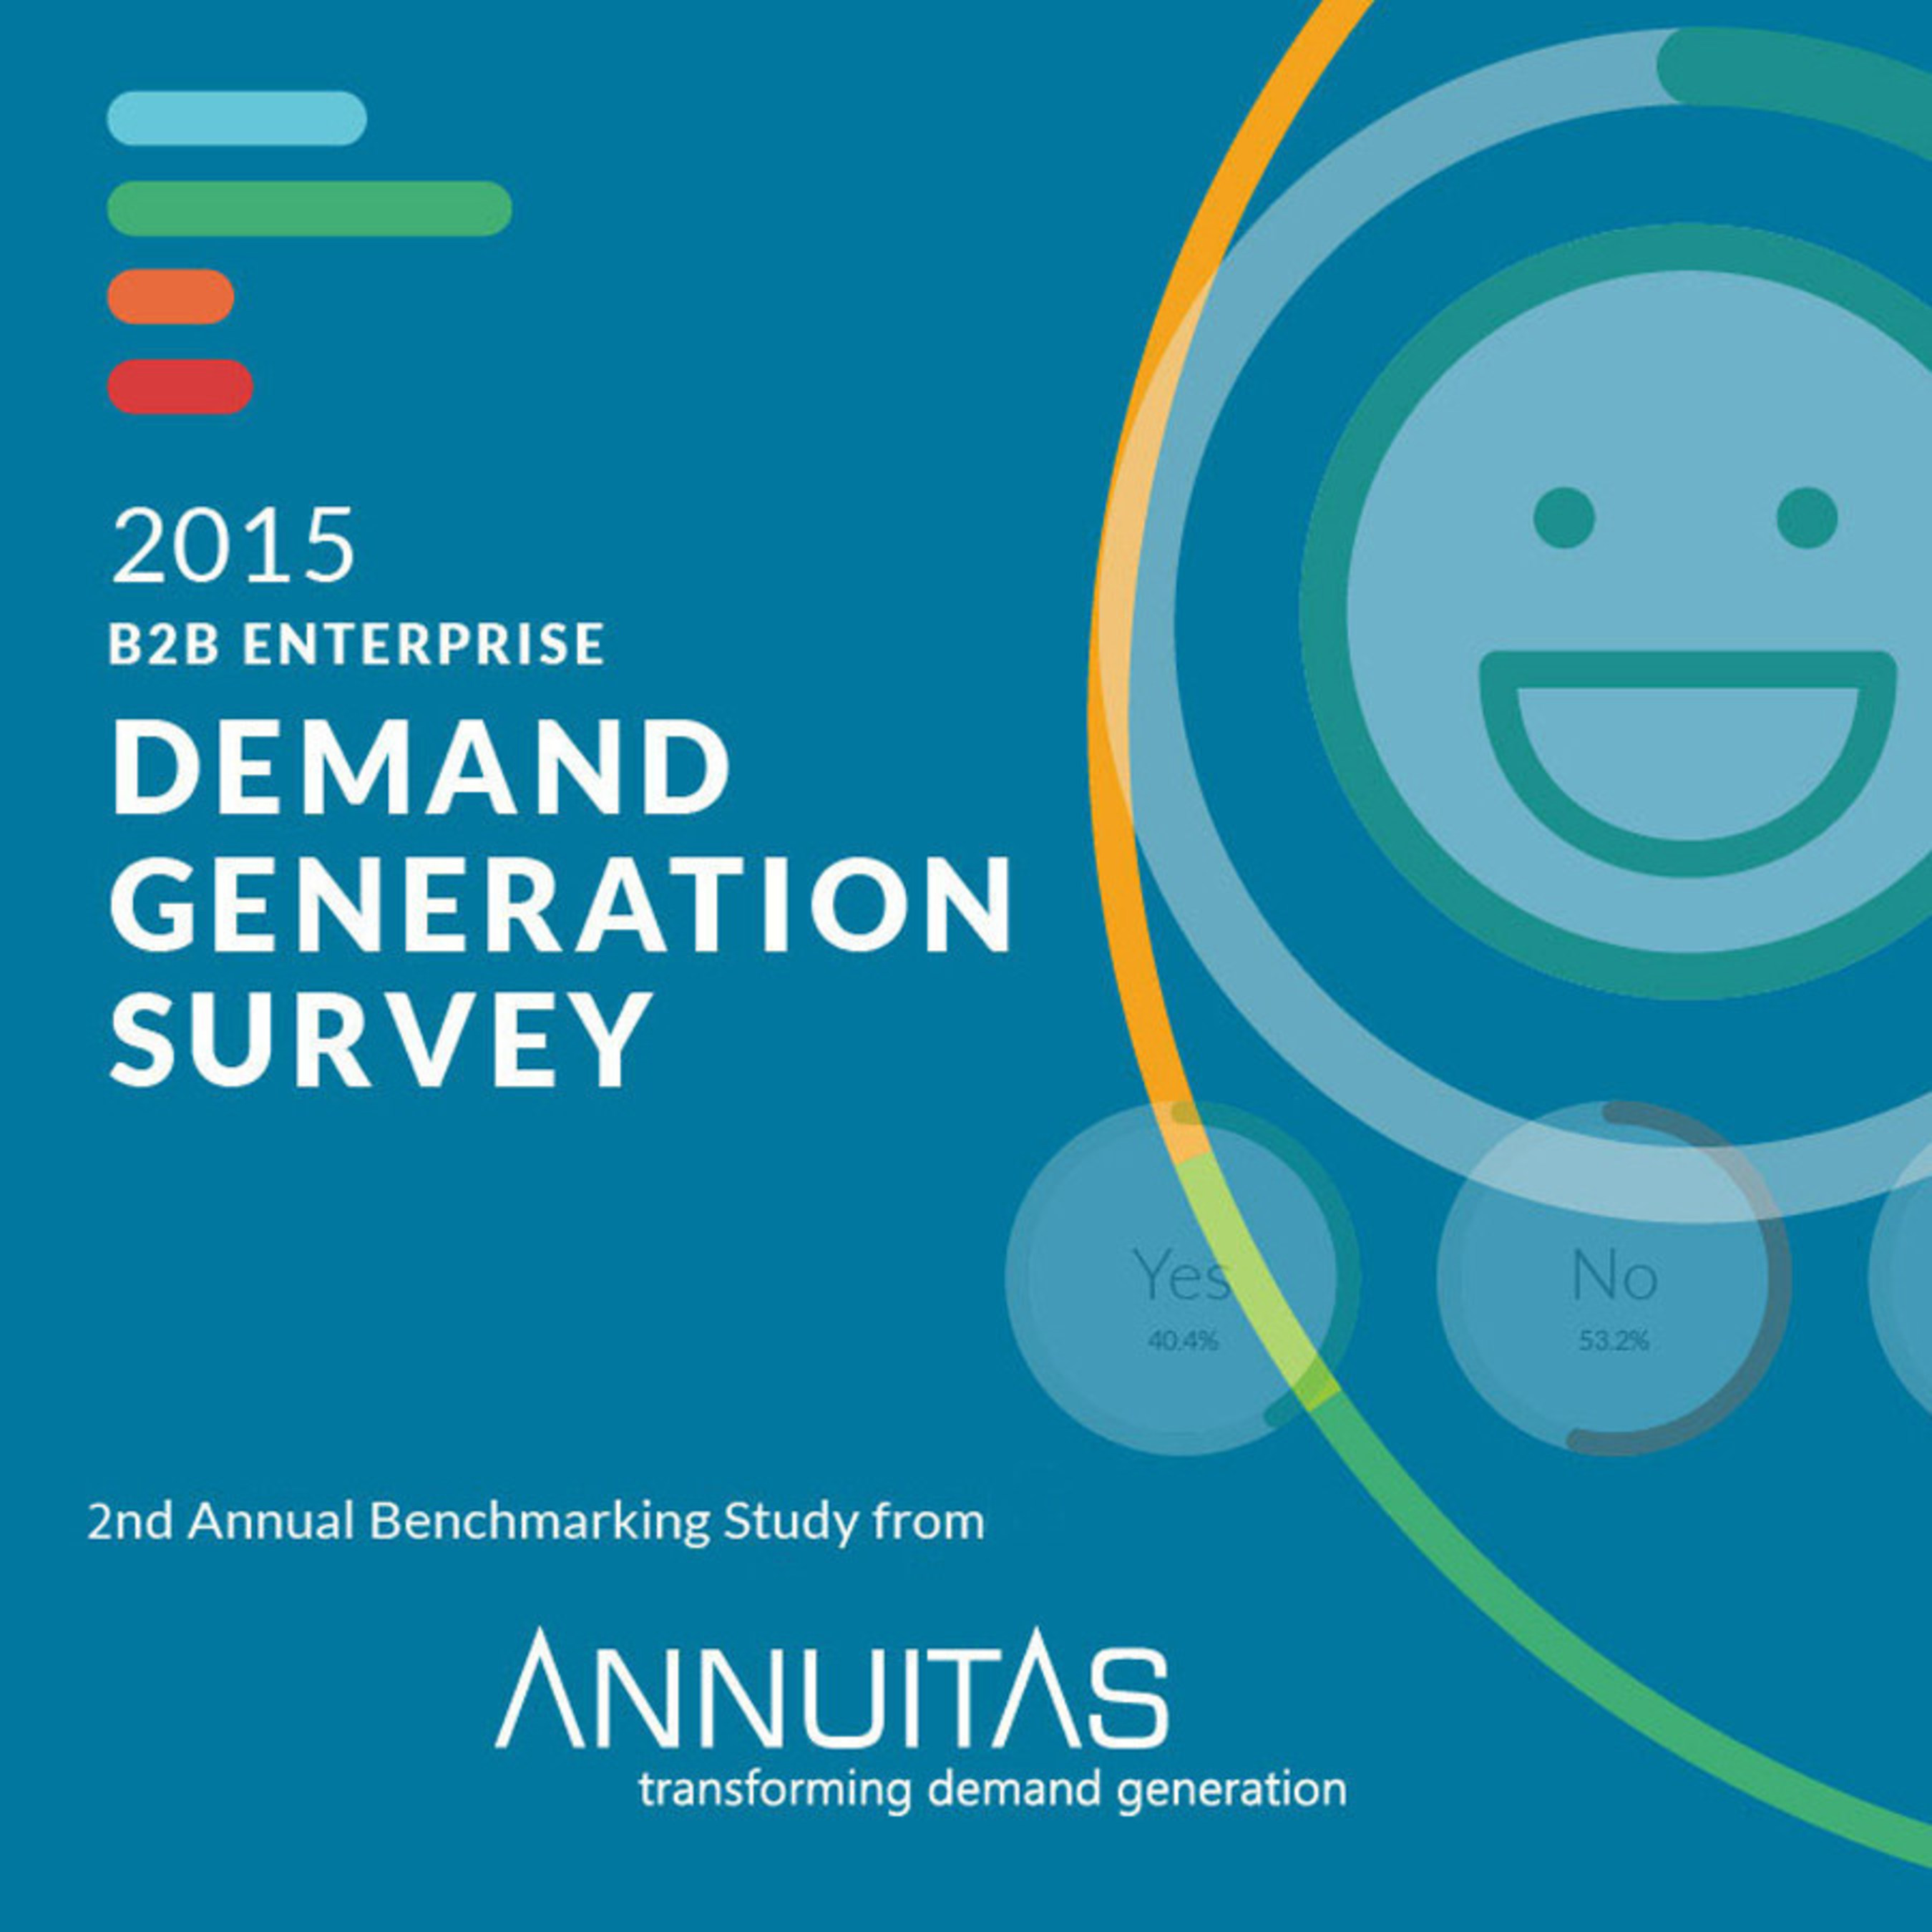 ANNUITAS Releases Findings from its 2nd B2B Enterprise Demand Generation Study.